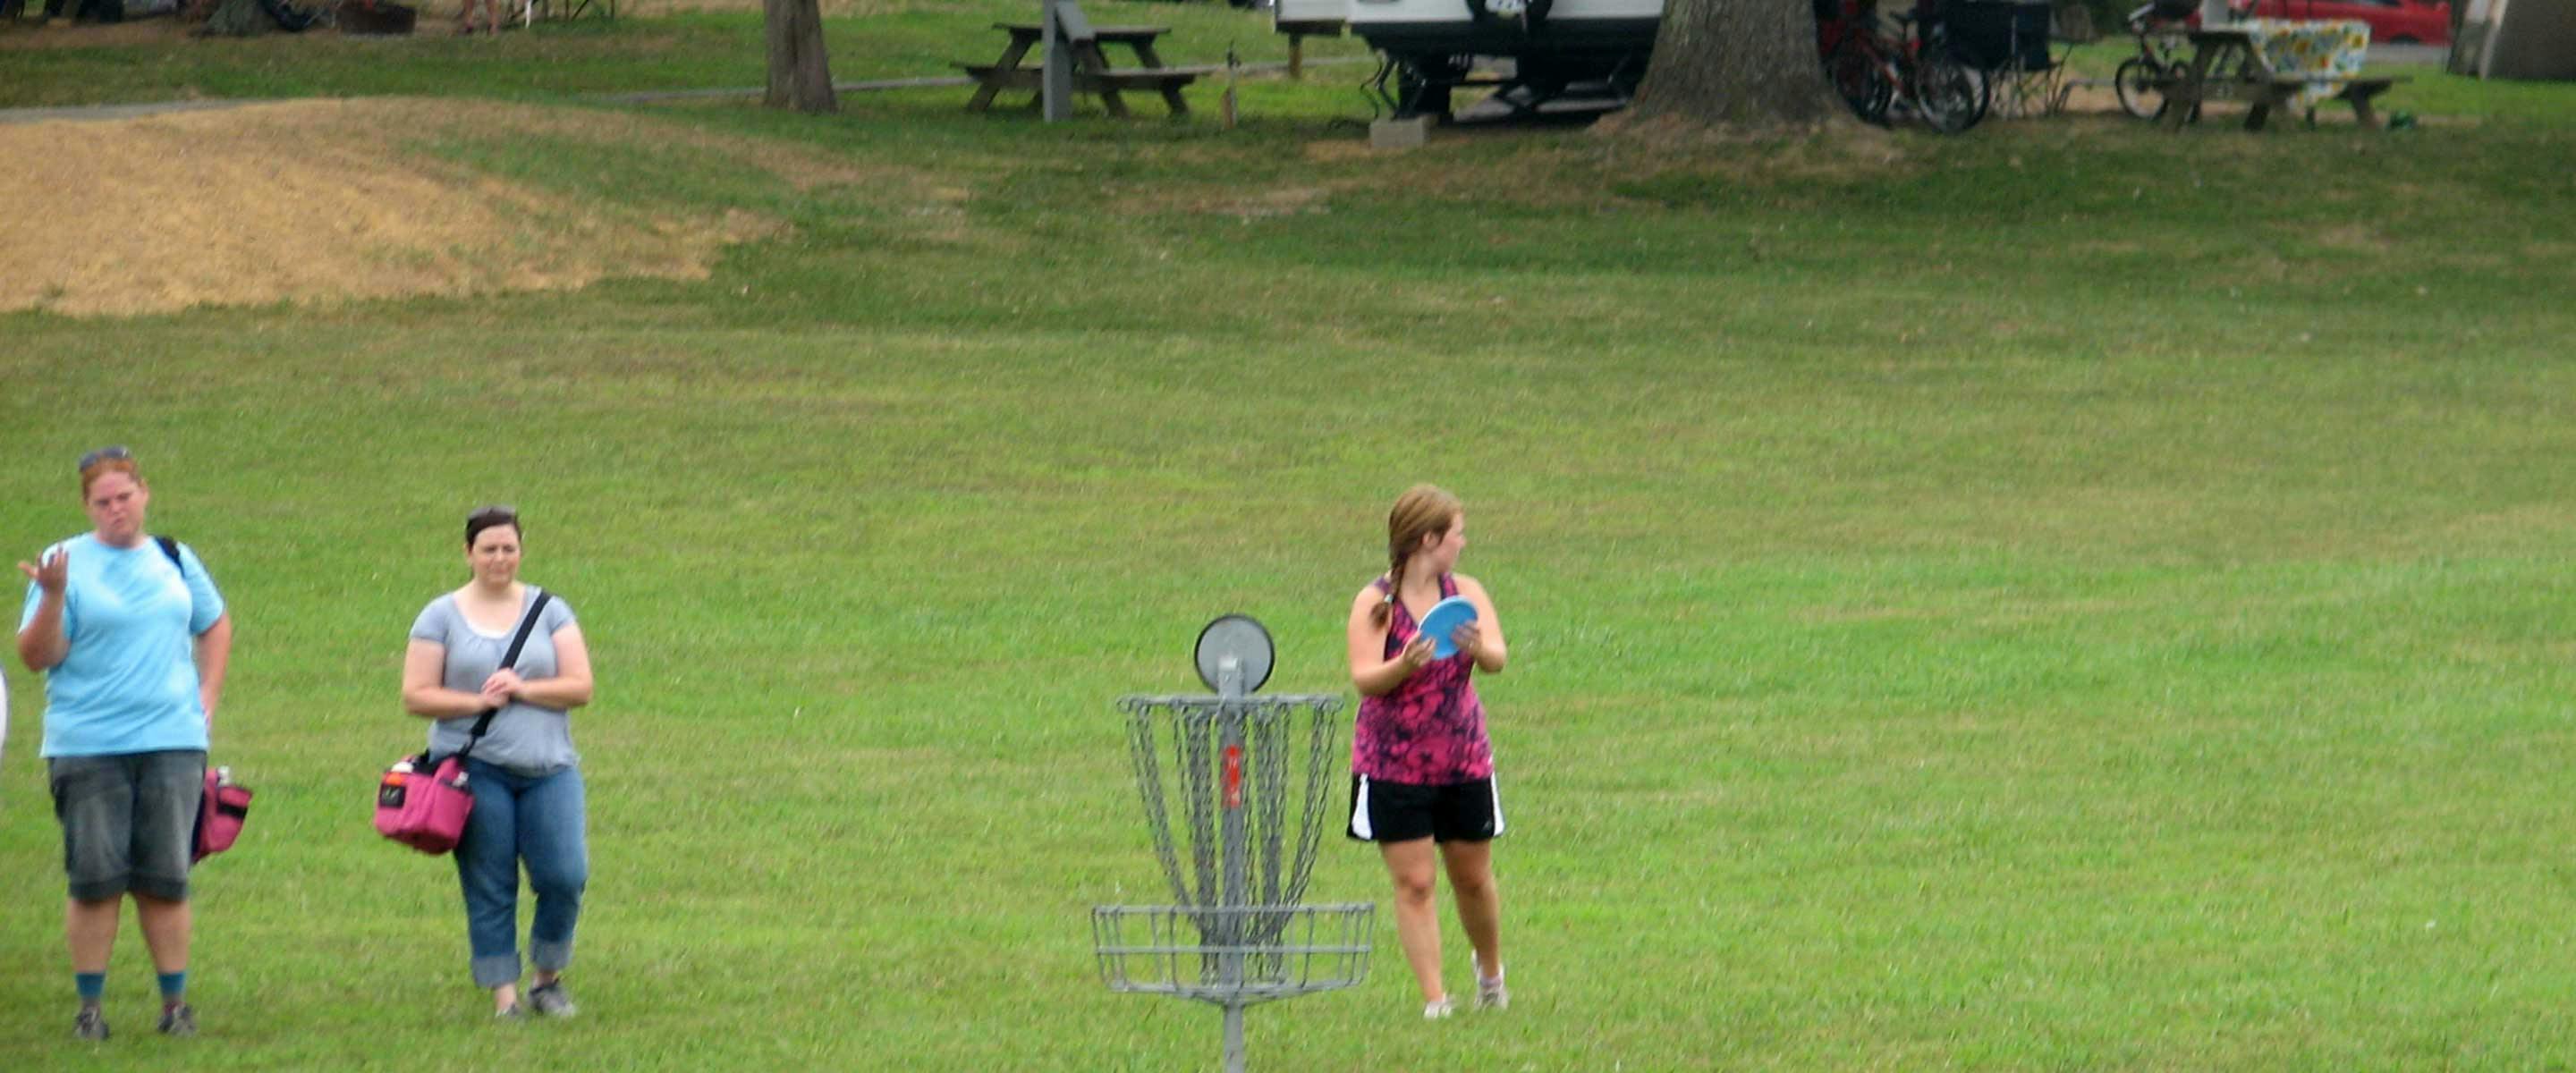 group playing frisbee golf